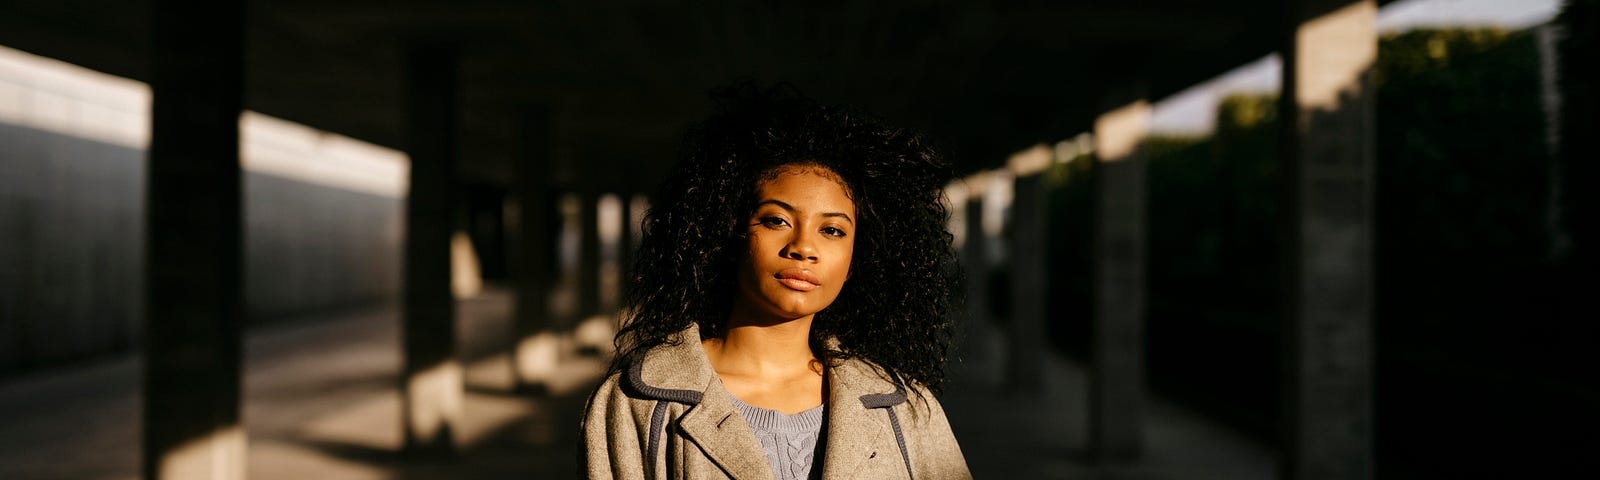 A Black woman standing in a dim parking garage with the light shining on her.